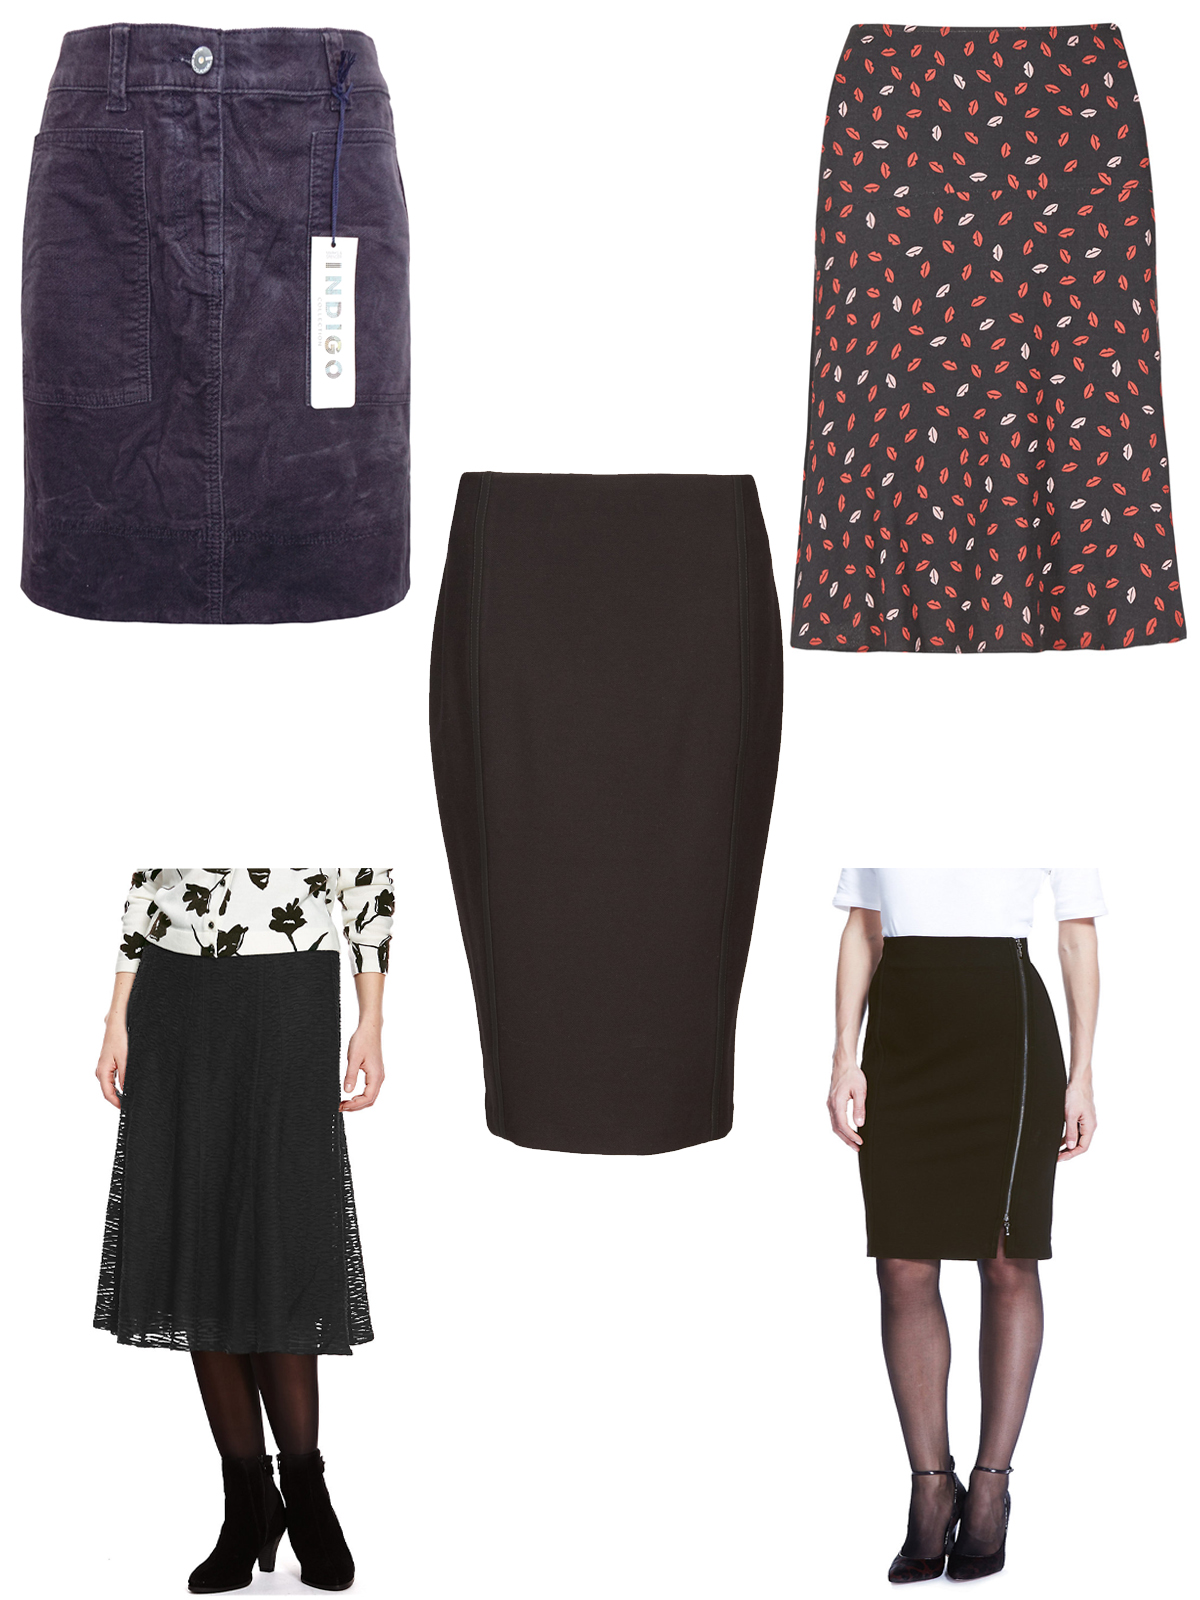 Marks and Spencer - - M&5 ASSORTED Ladies Skirts - Size 8 to 14